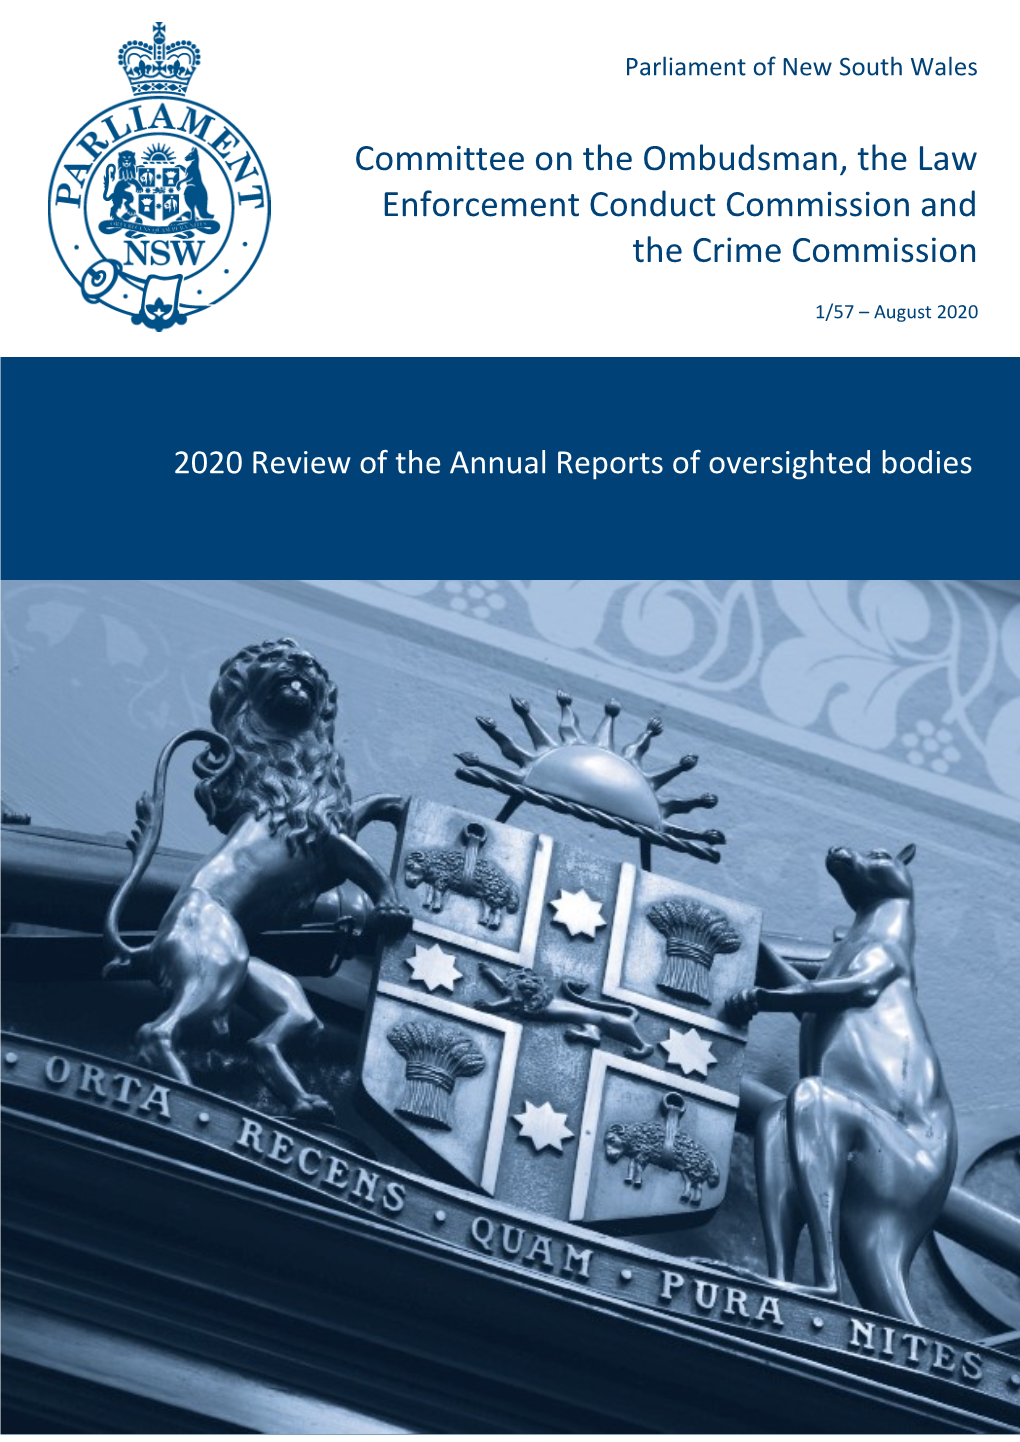 2020 Review of the Annual Reports of Oversight Bodies